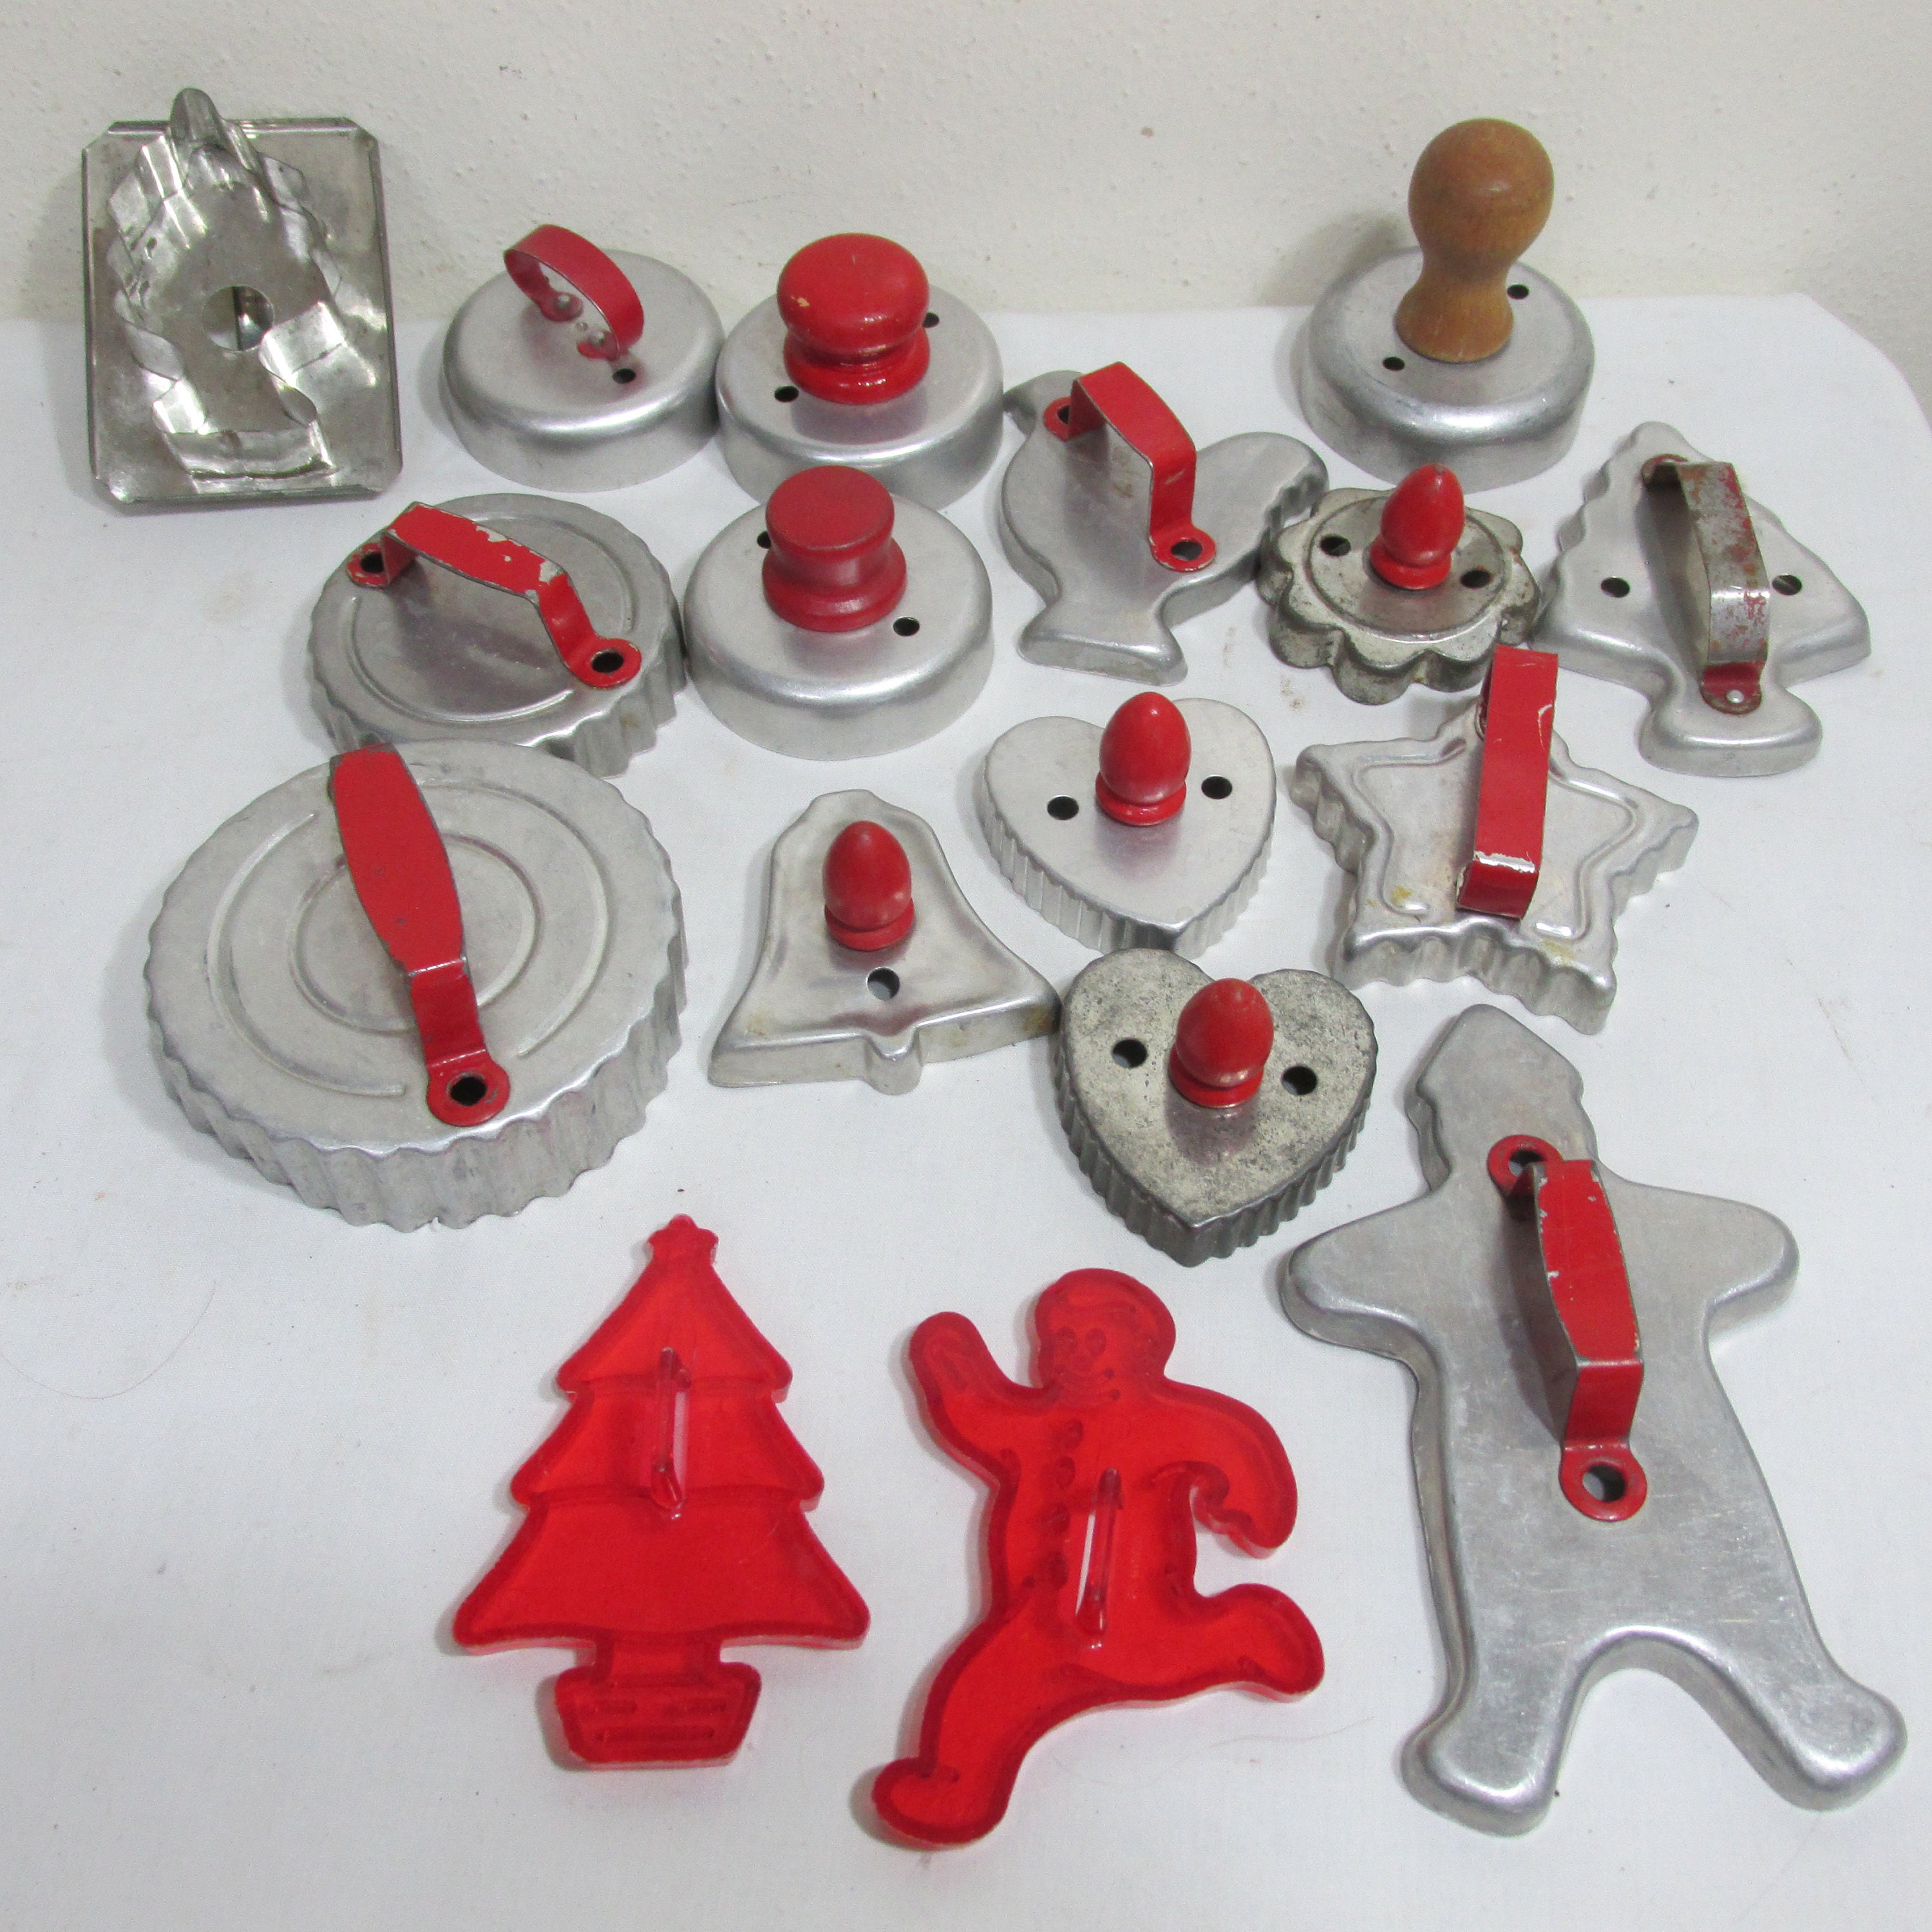 Vintage Christmas Cookie Cutters - Etsy